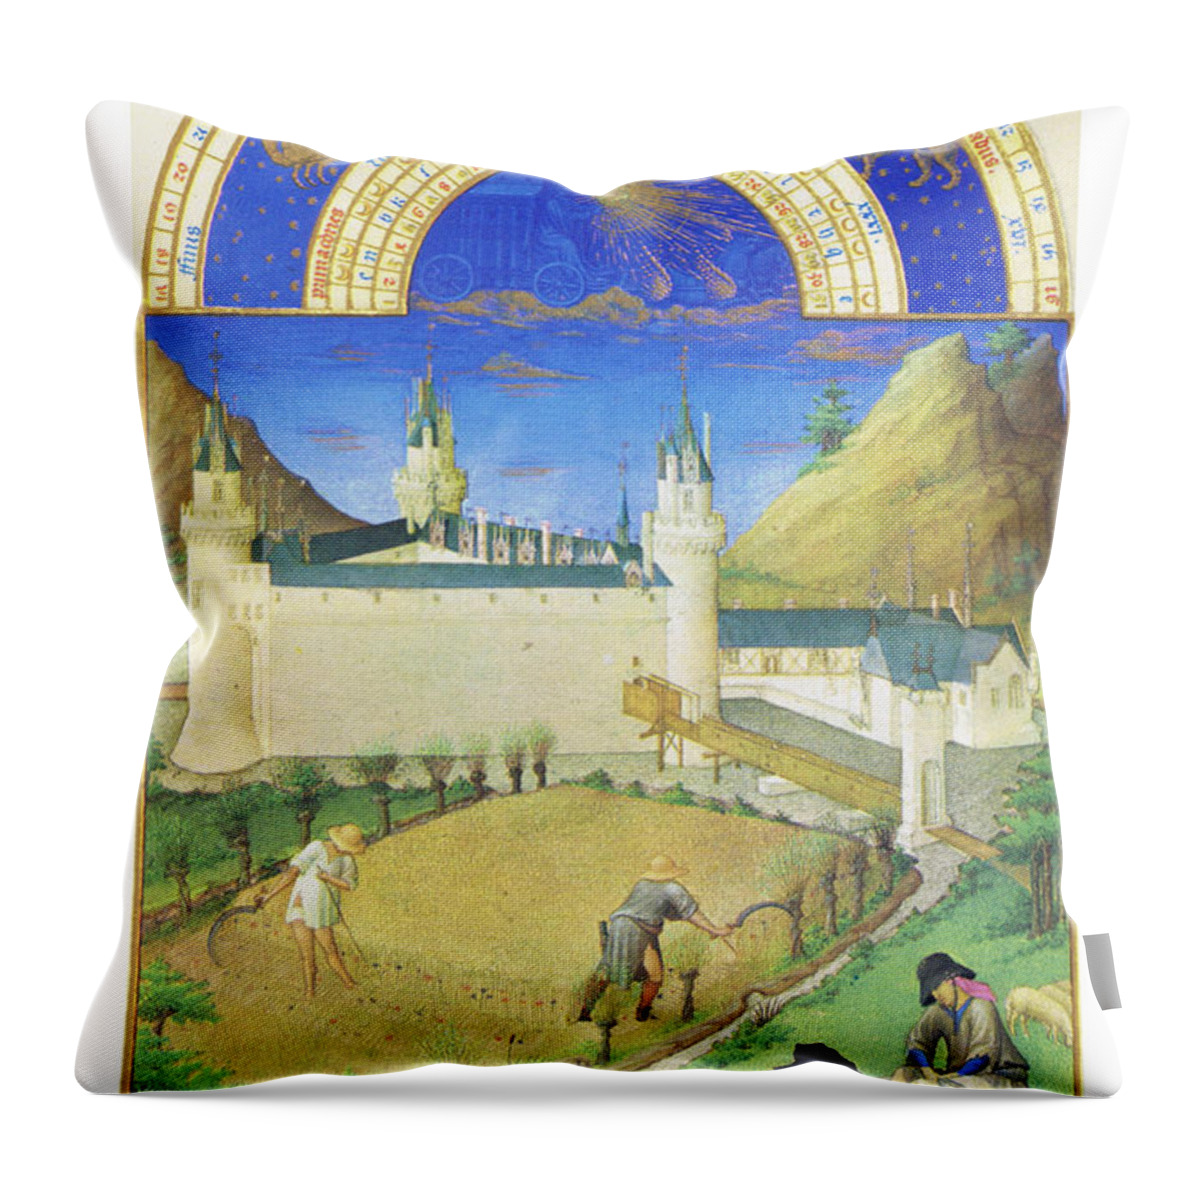 Middle Ages Throw Pillow featuring the painting Le Tres riches heures du Duc de Berry - July by Limbourg brothers